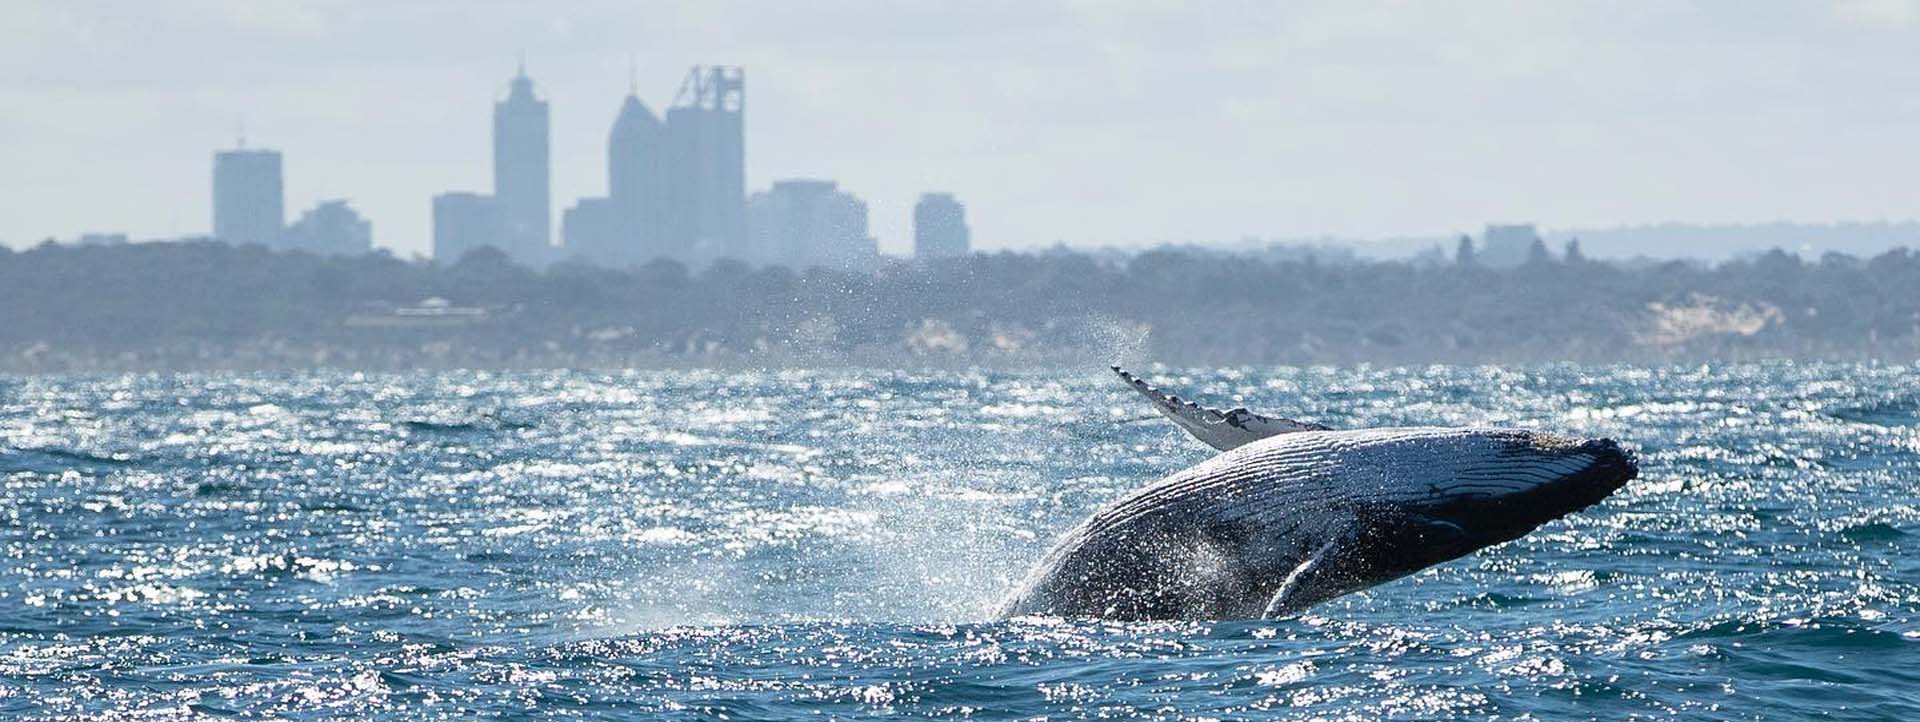 PERTH WHALE WATCHING PRICES 2020 slider